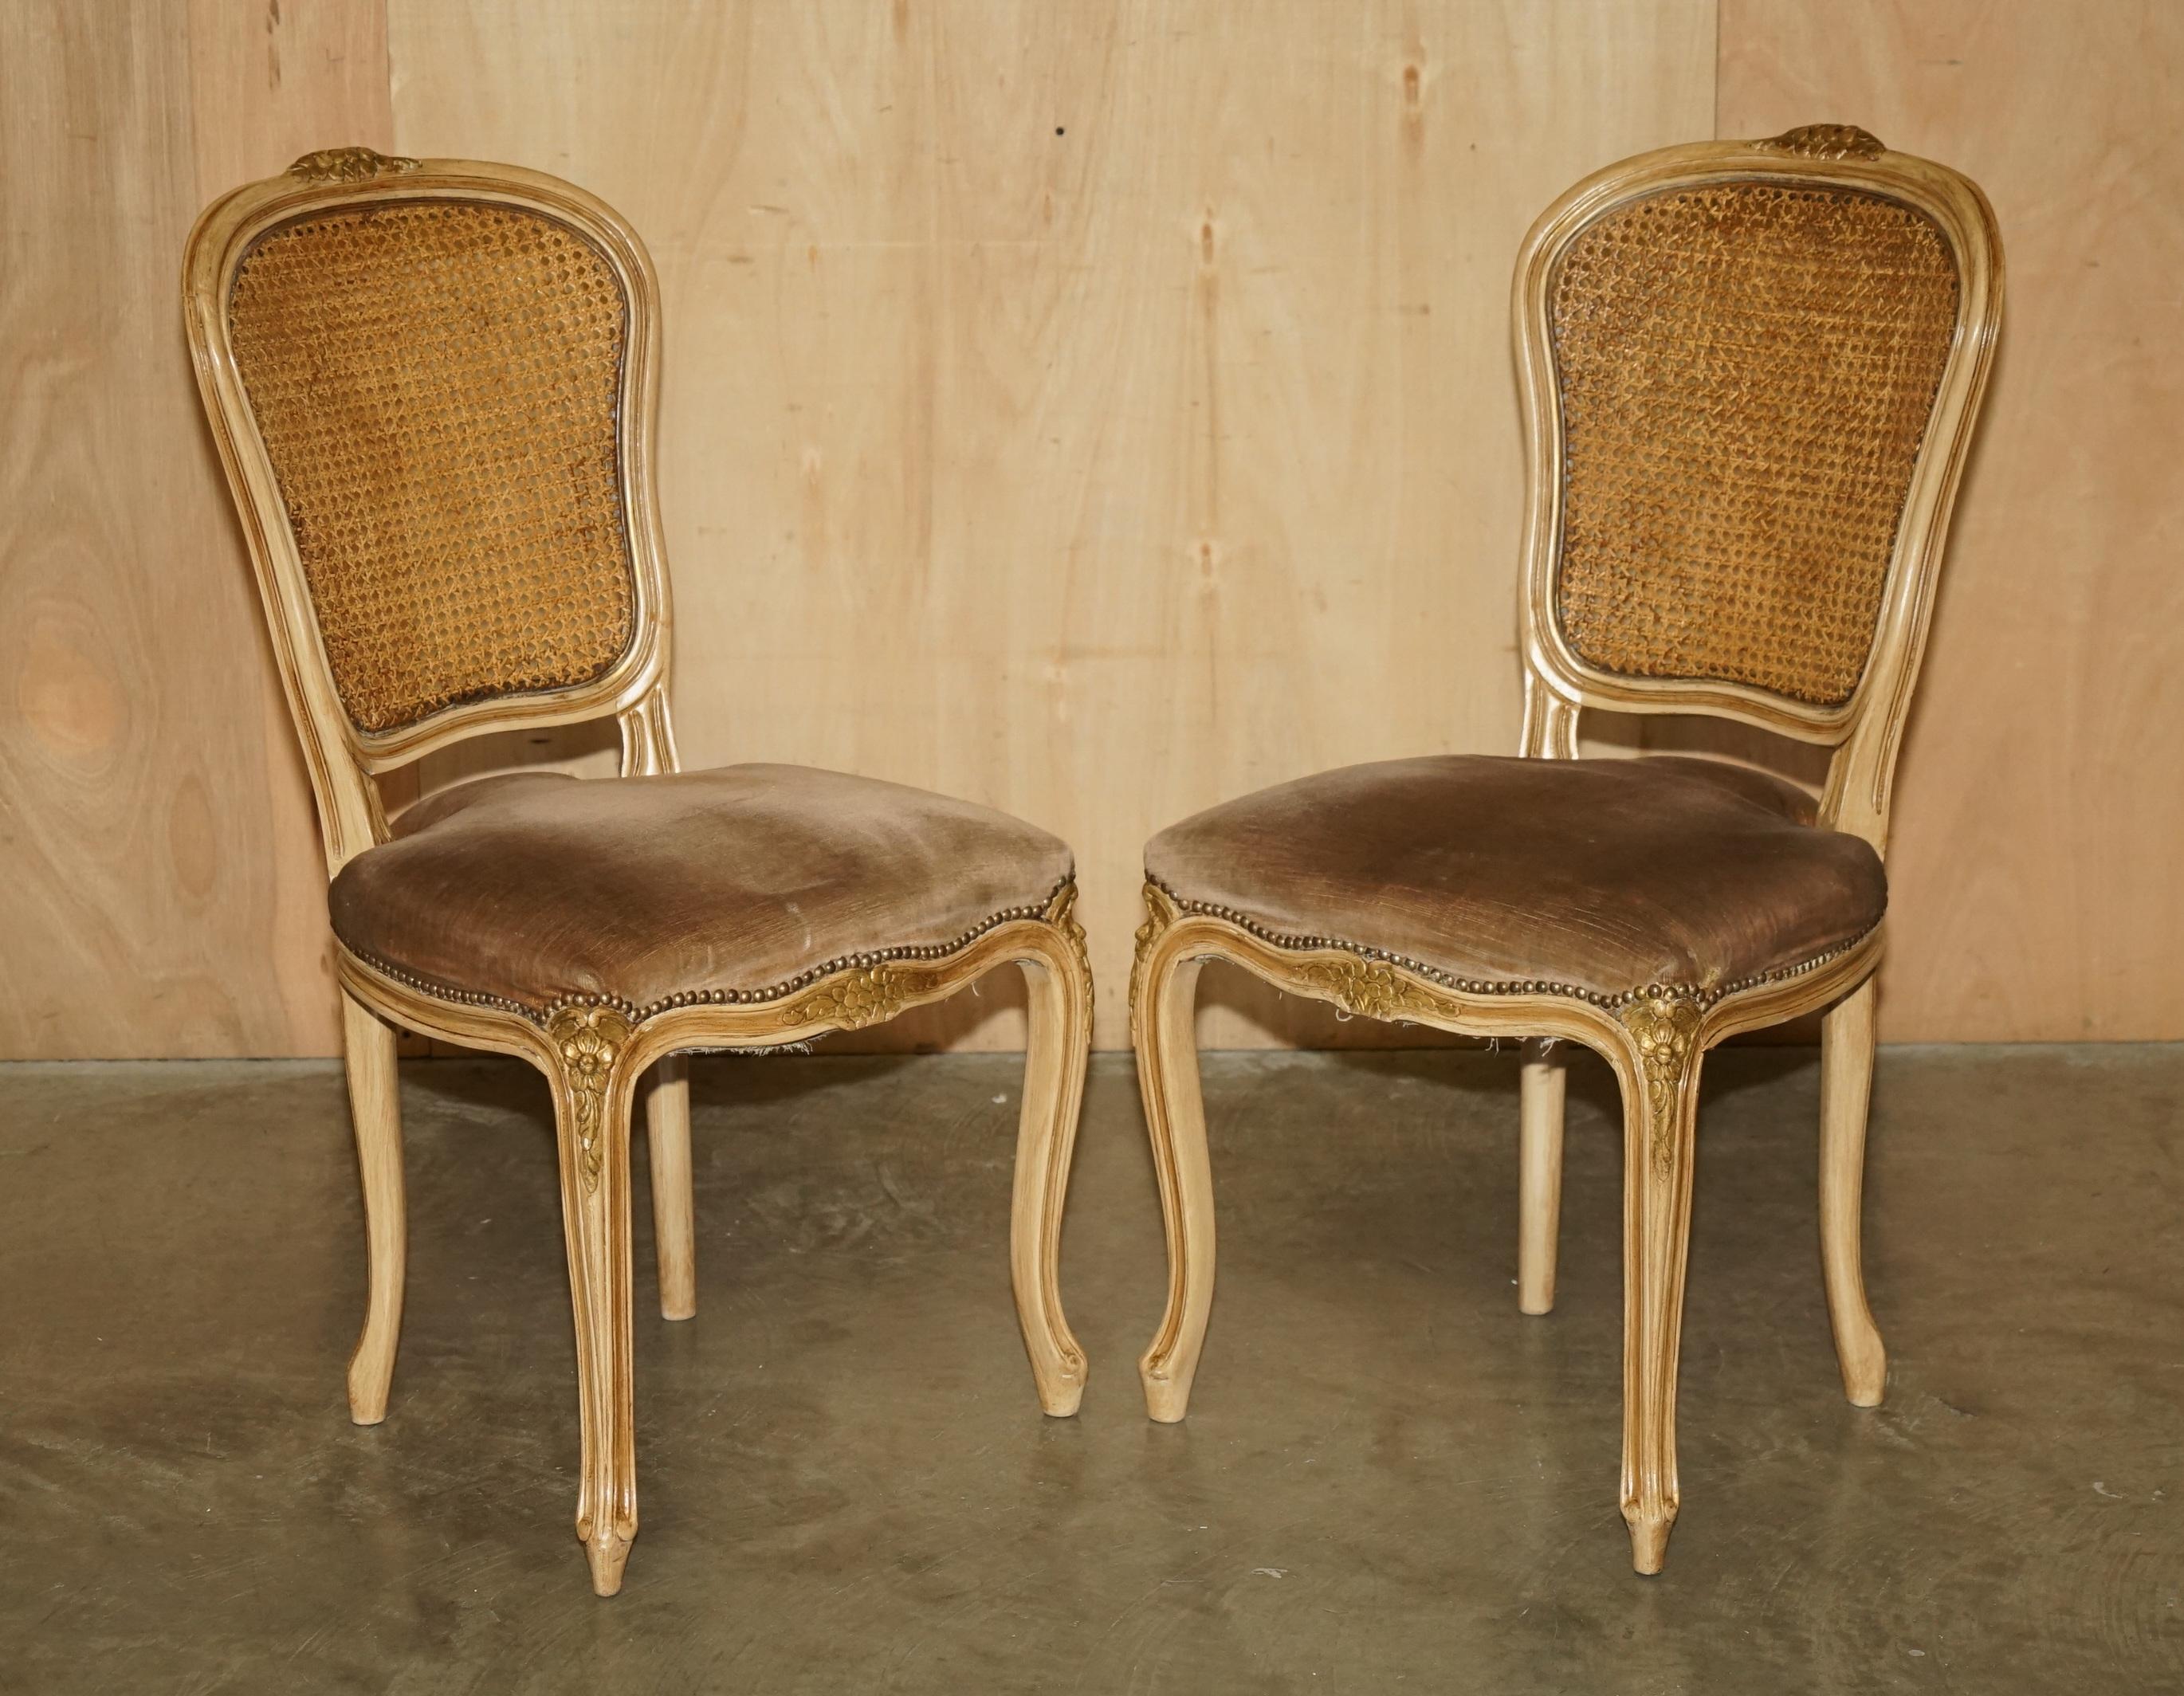 Royal House Antiques

Royal House Antiques is delighted to offer for sale this stunning suite of four antique circa 1870 French Bergere dining chairs with hand painted finish and period velour upholstery 

Please note the delivery fee listed is just